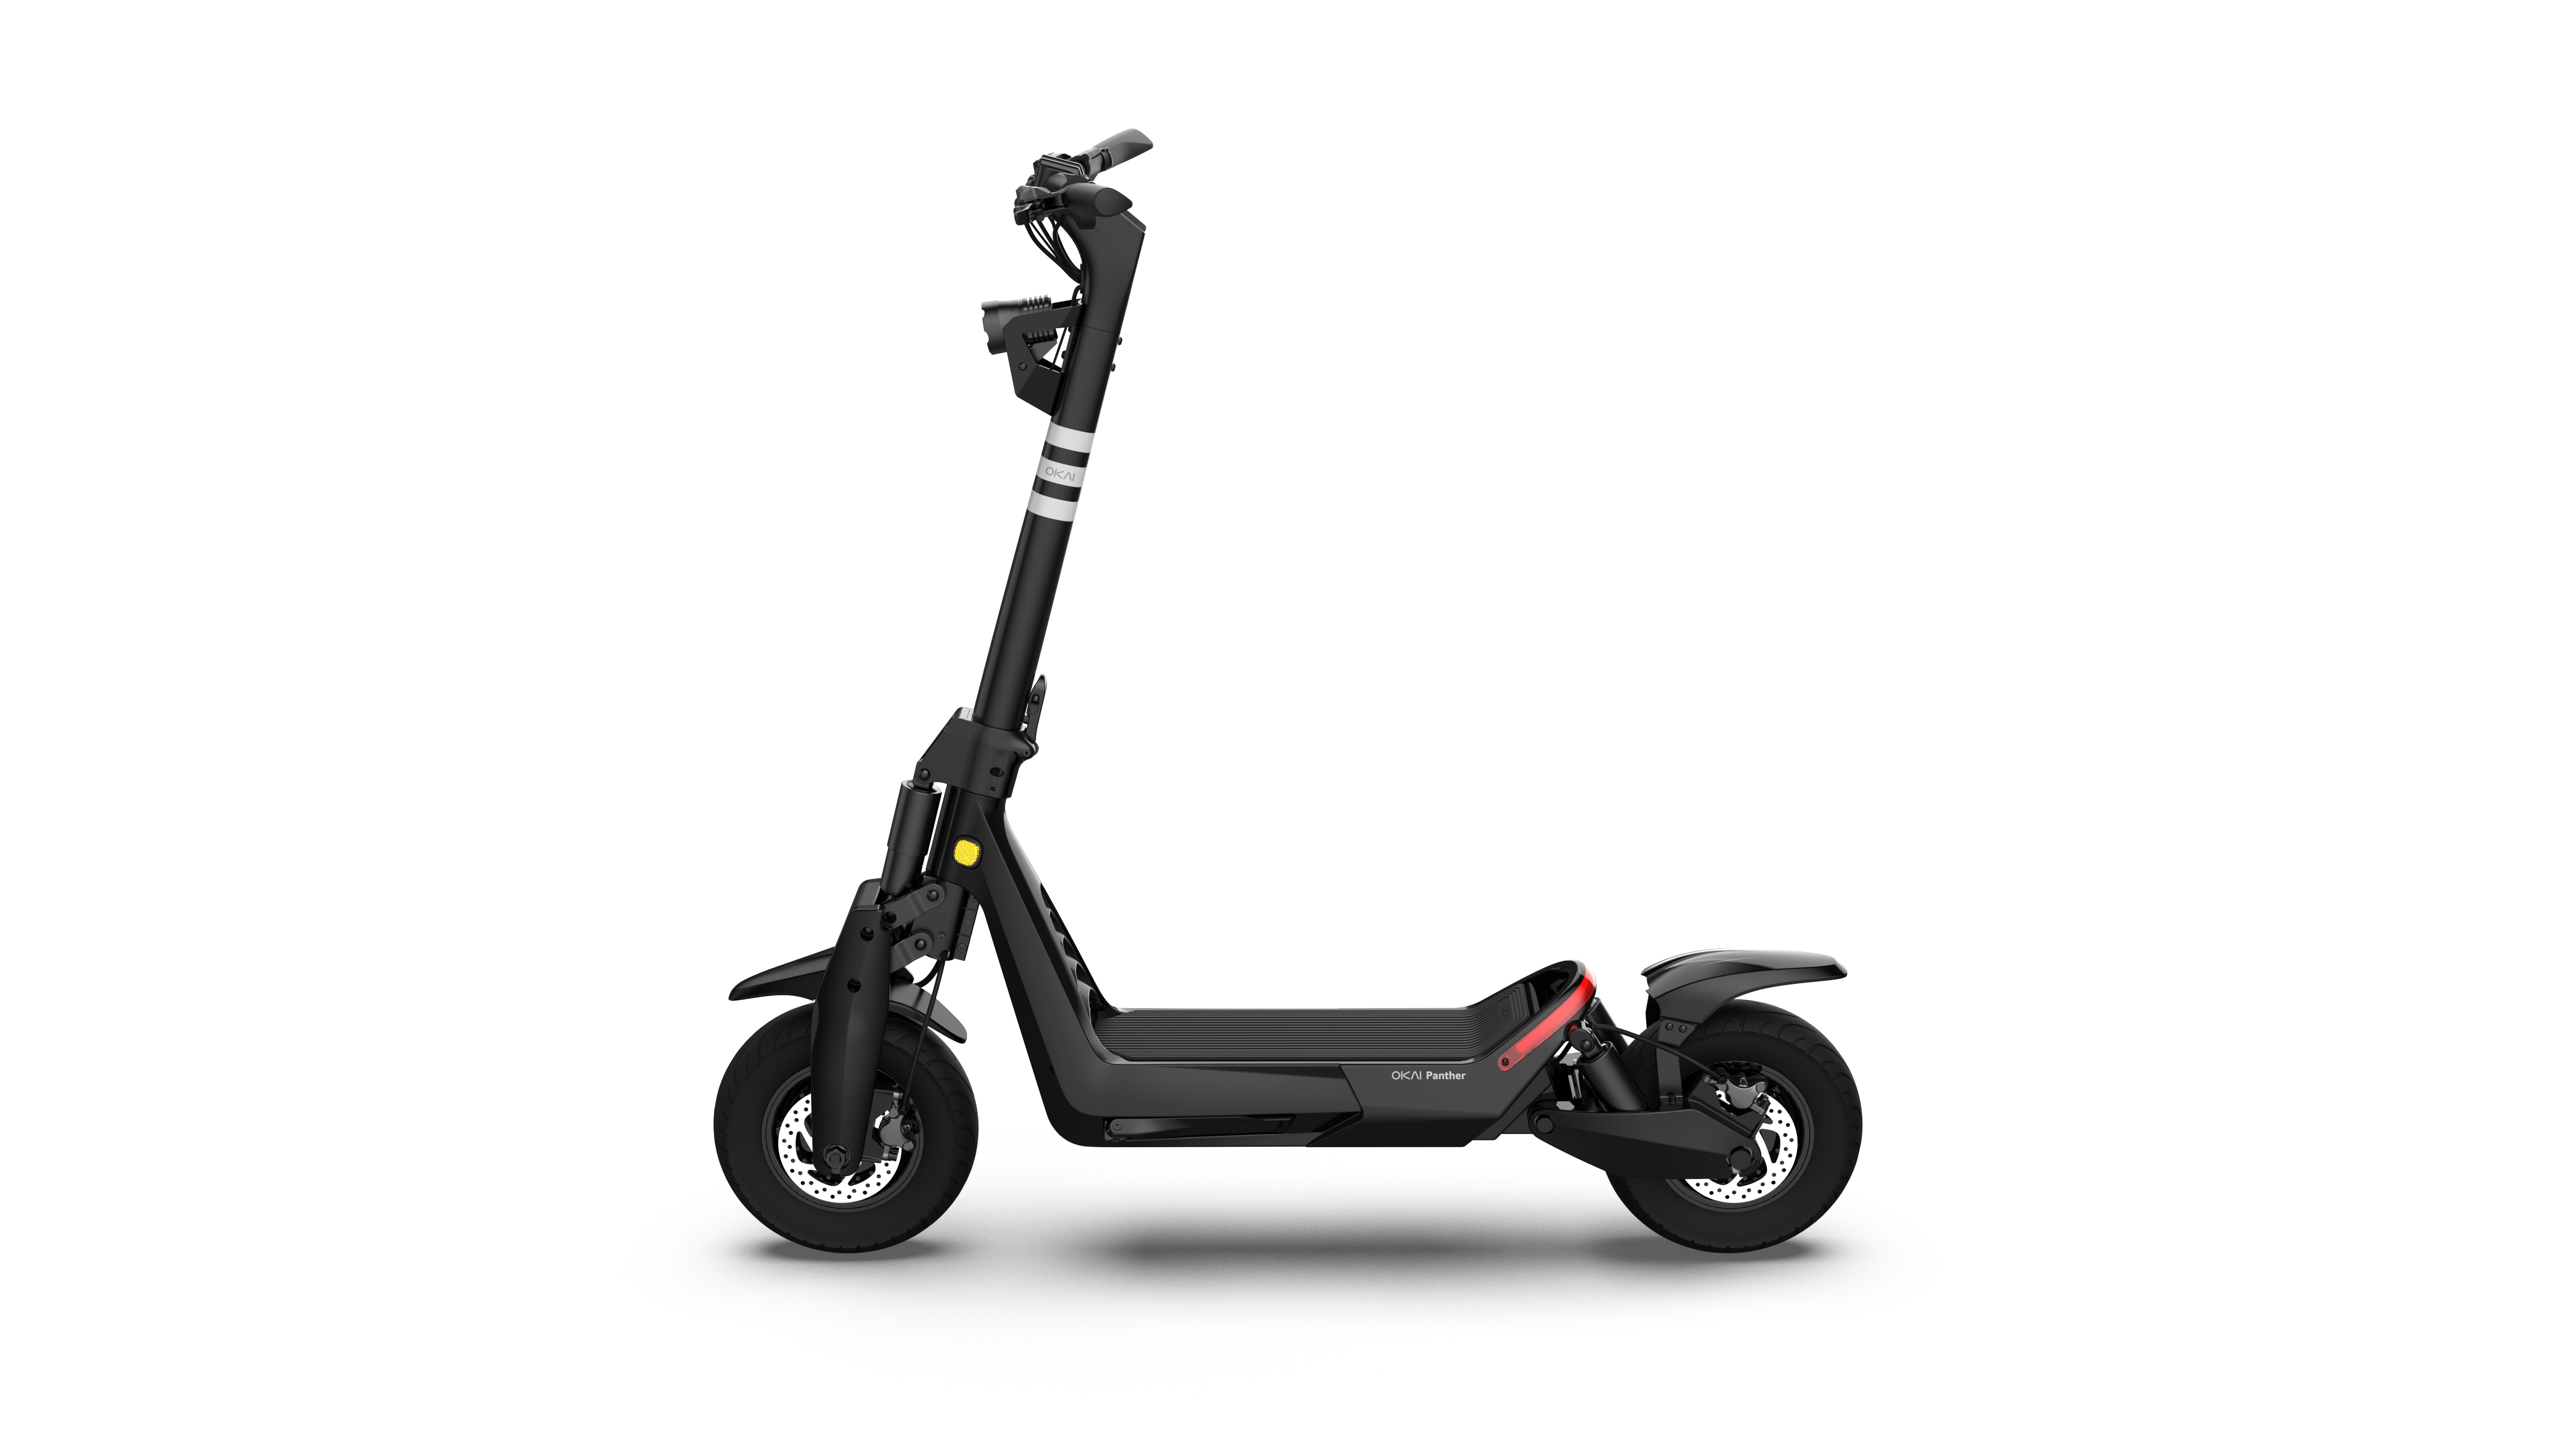 ES800 Off-road Performance e-Scooter